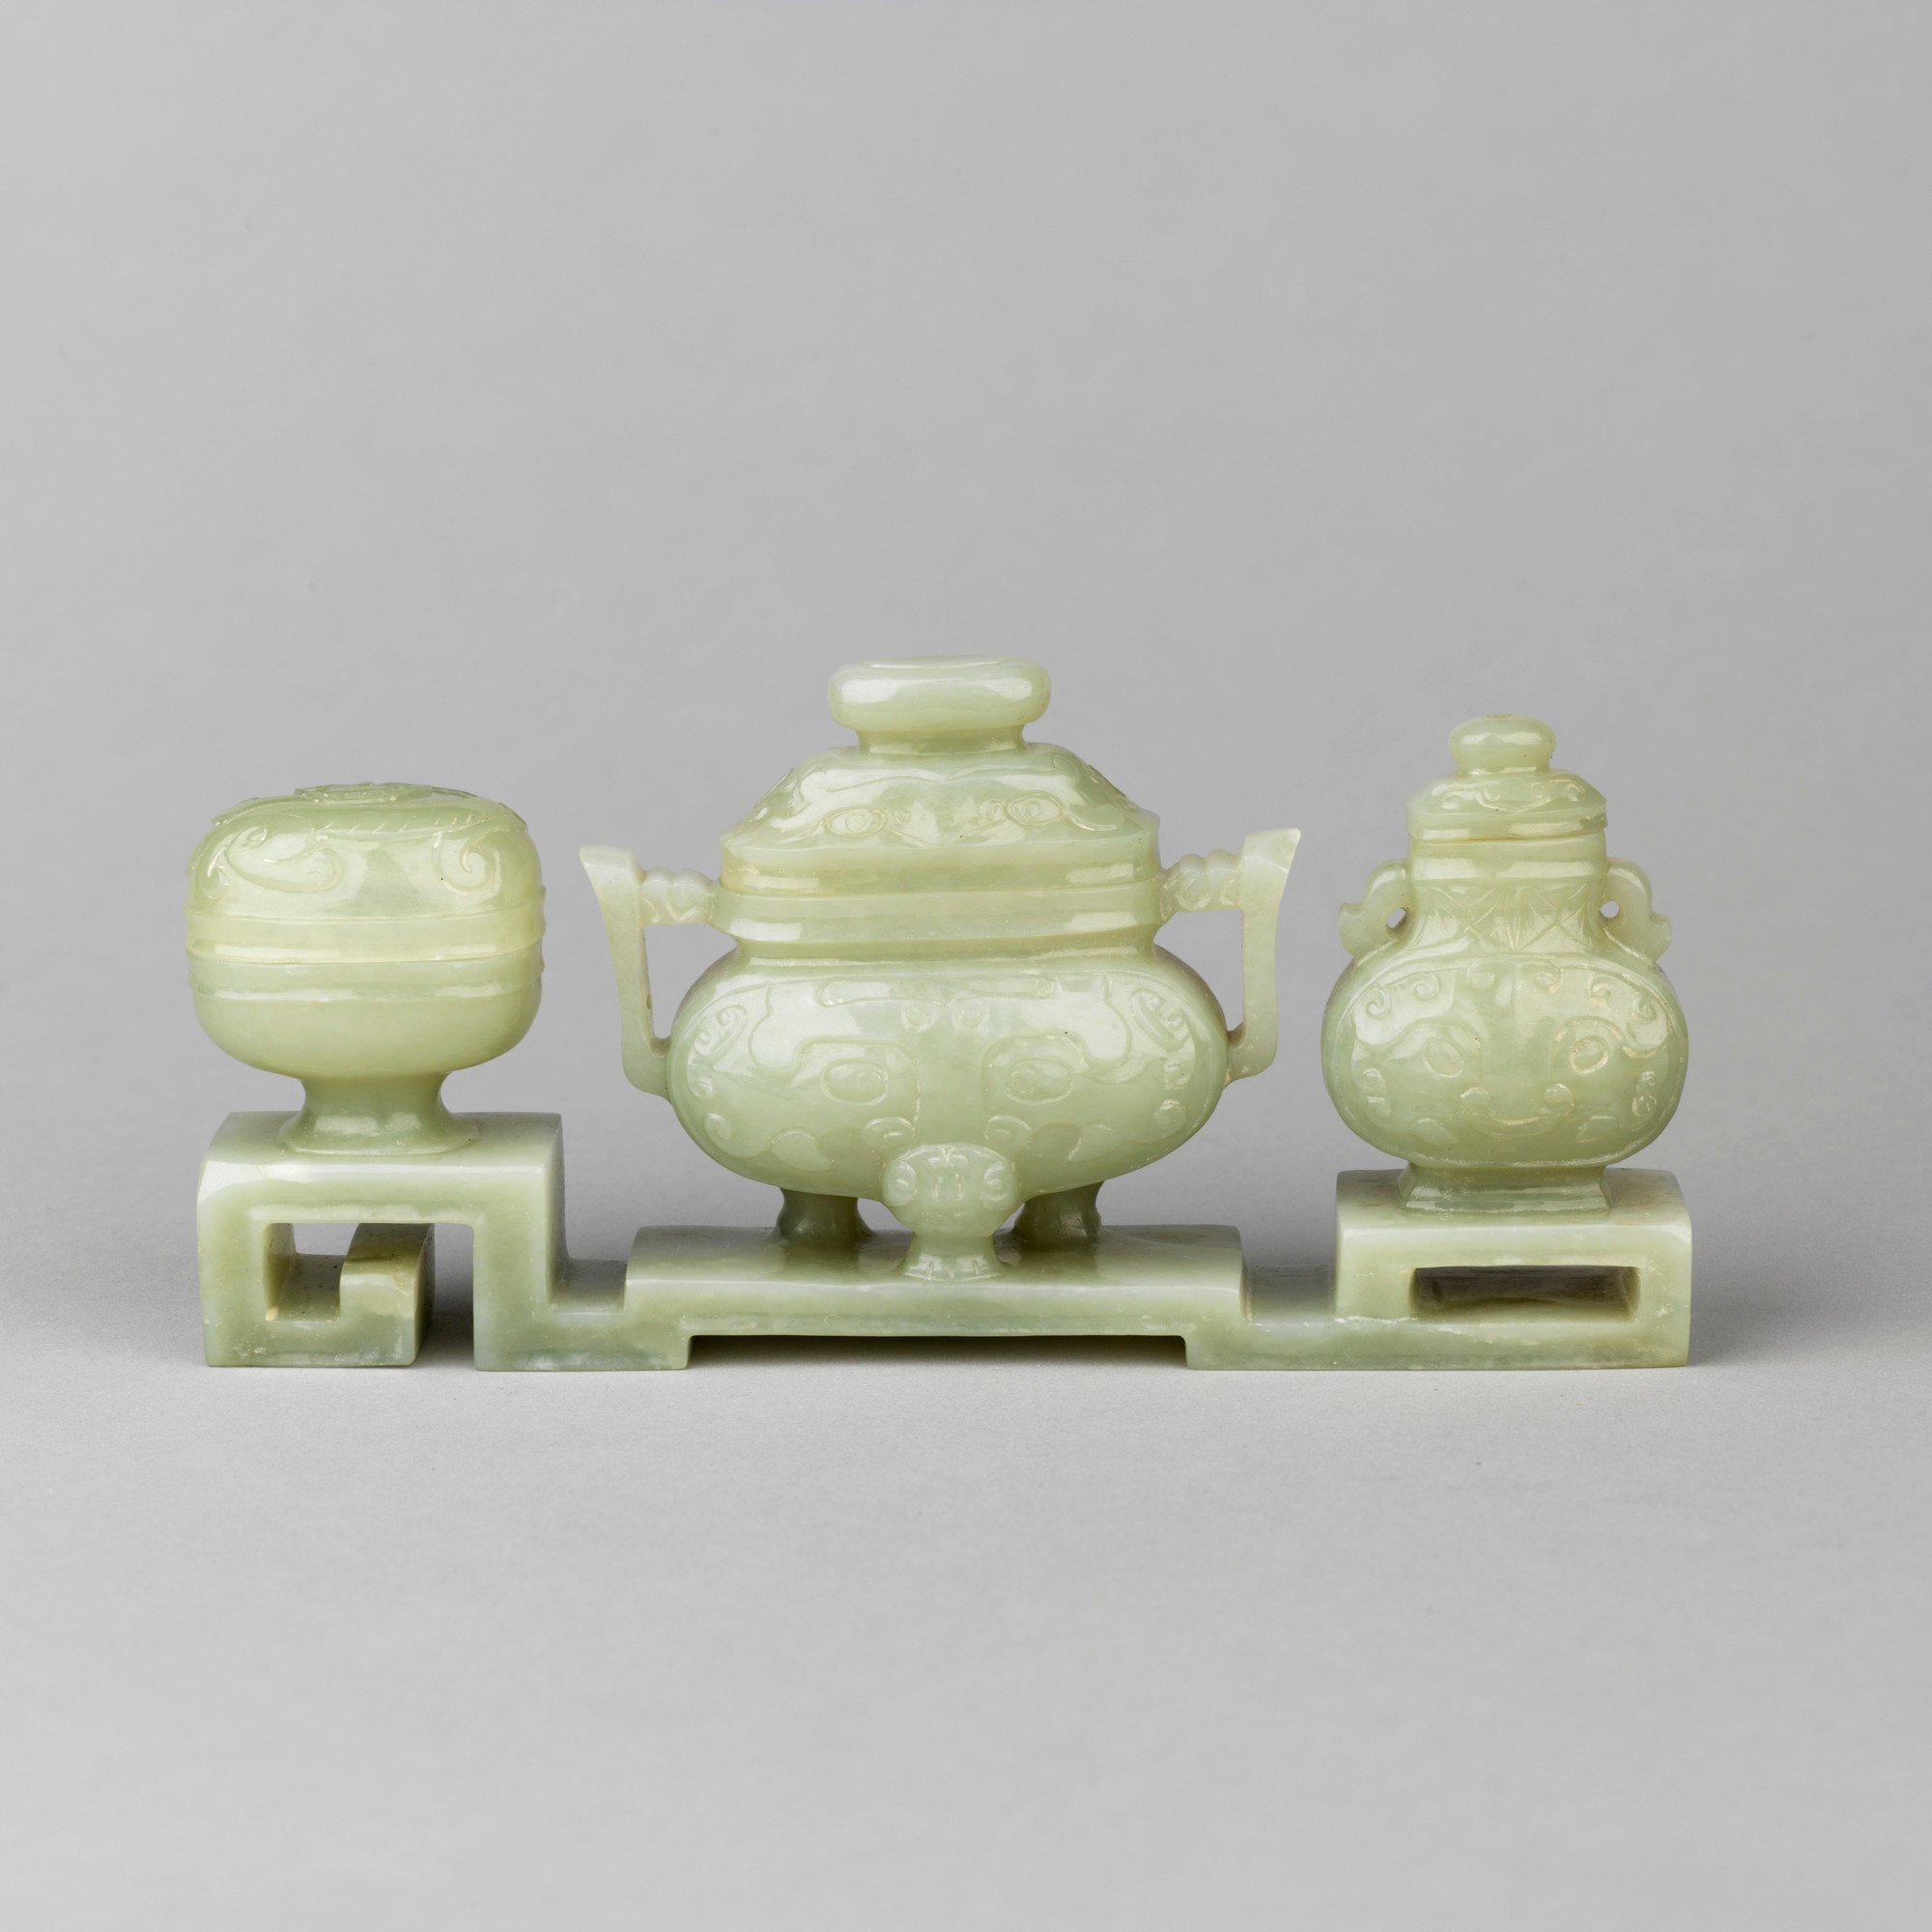 Three vases in archaic bronze forms carved on a stepped stand: in the centre, an incense burner, with upright handles and three animal-style feet, carved with a taotie, the domed cover with an oval button knob; to one side, a two-handled vase, also with t